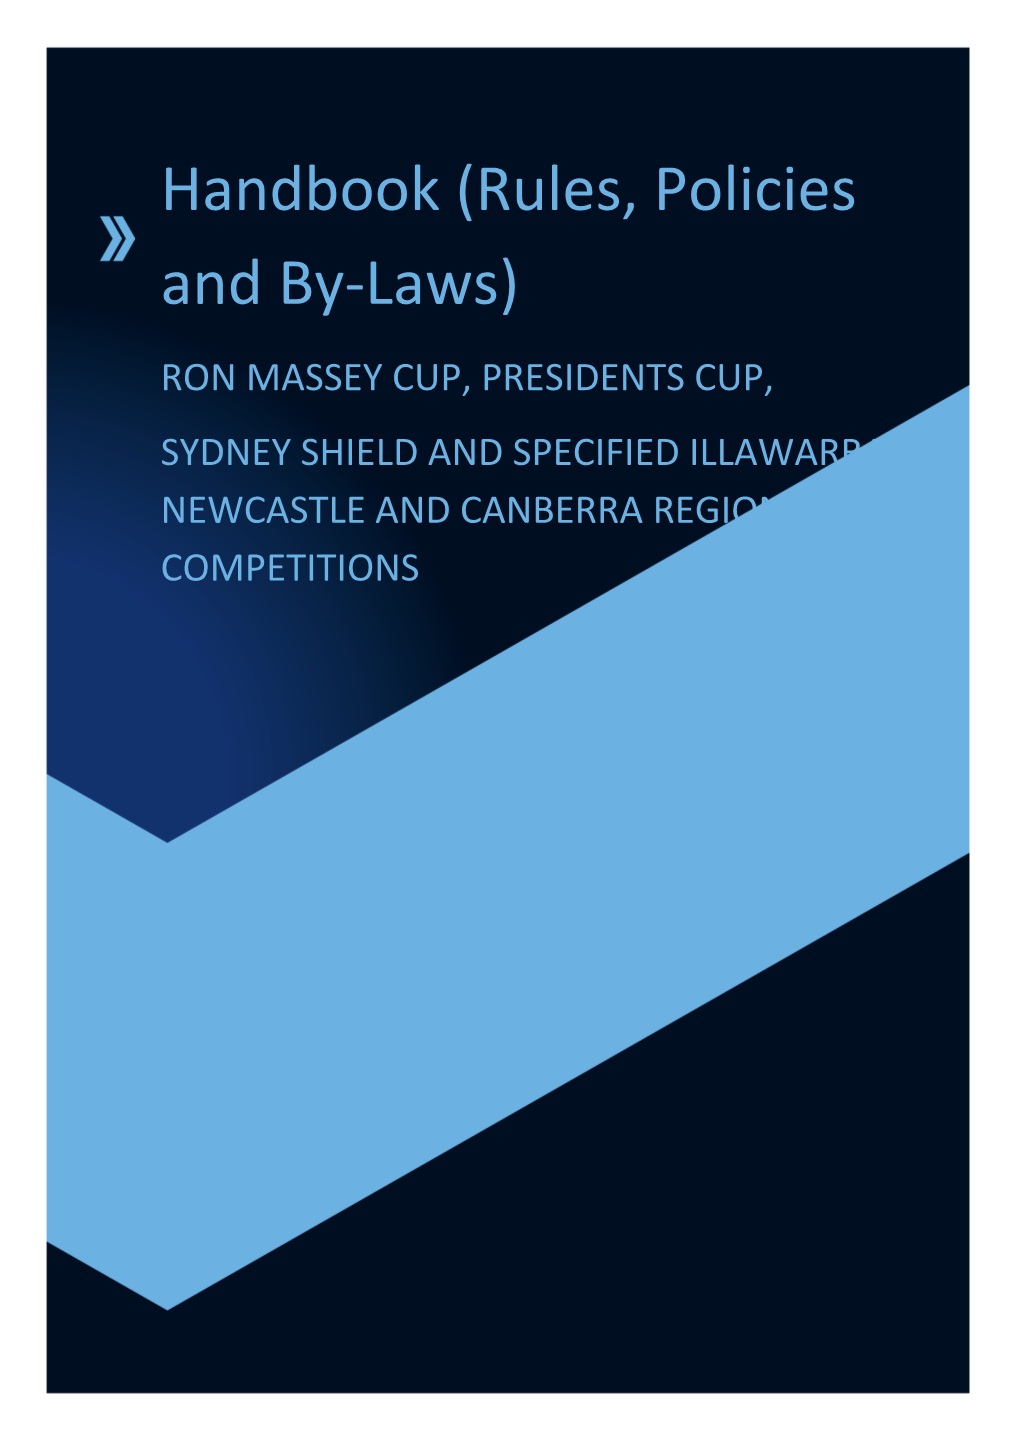 Handbook (Rules, Policies and By-Laws) RON MASSEY CUP, PRESIDENTS CUP, SYDNEY SHIELD and SPECIFIED ILLAWARRA, NEWCASTLE and CANBERRA REGION COMPETITIONS